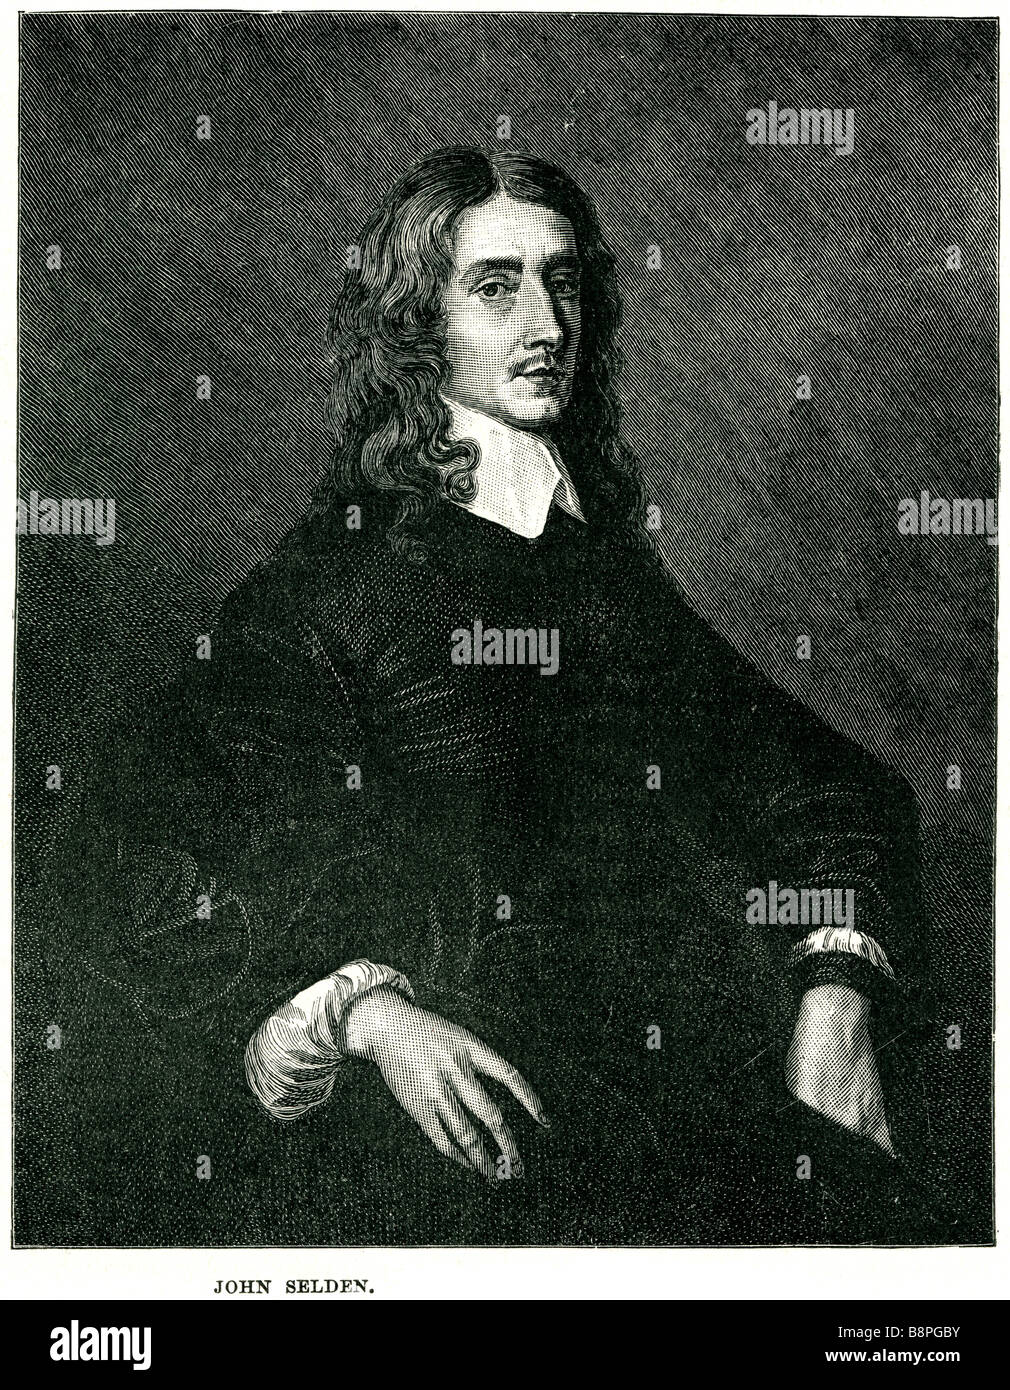 John Selden (December 16, 1584 – November 30, 1654) was an English jurist, scholar of England's ancient laws and constitution an Stock Photo